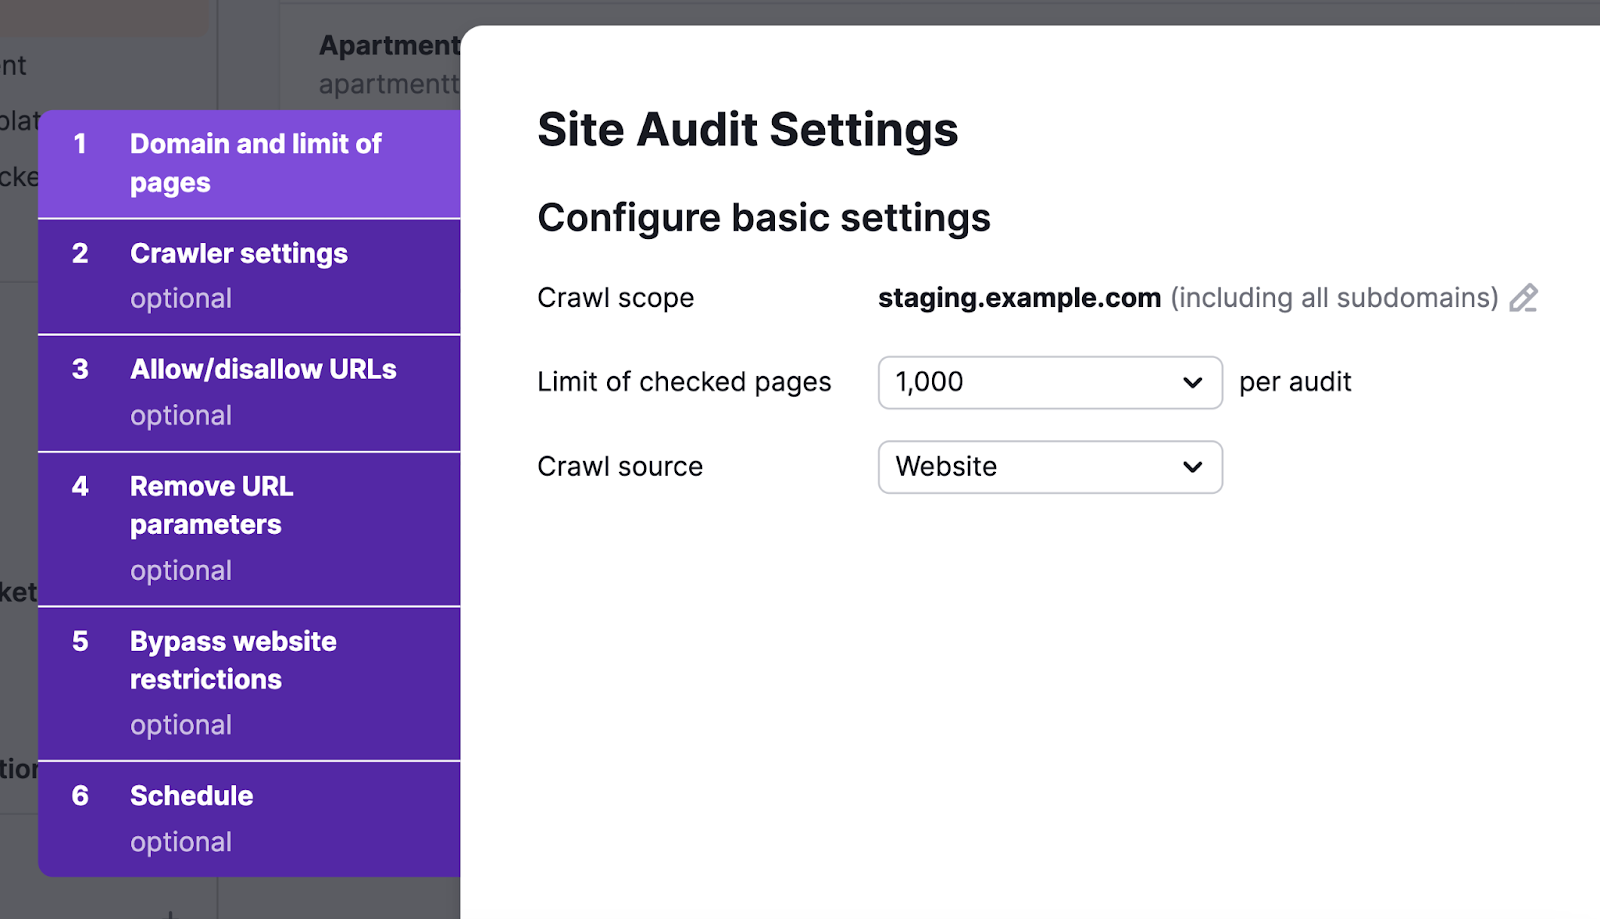 Site Audit tool basic settings, including crawl score, limit of checked pages, and crawl source